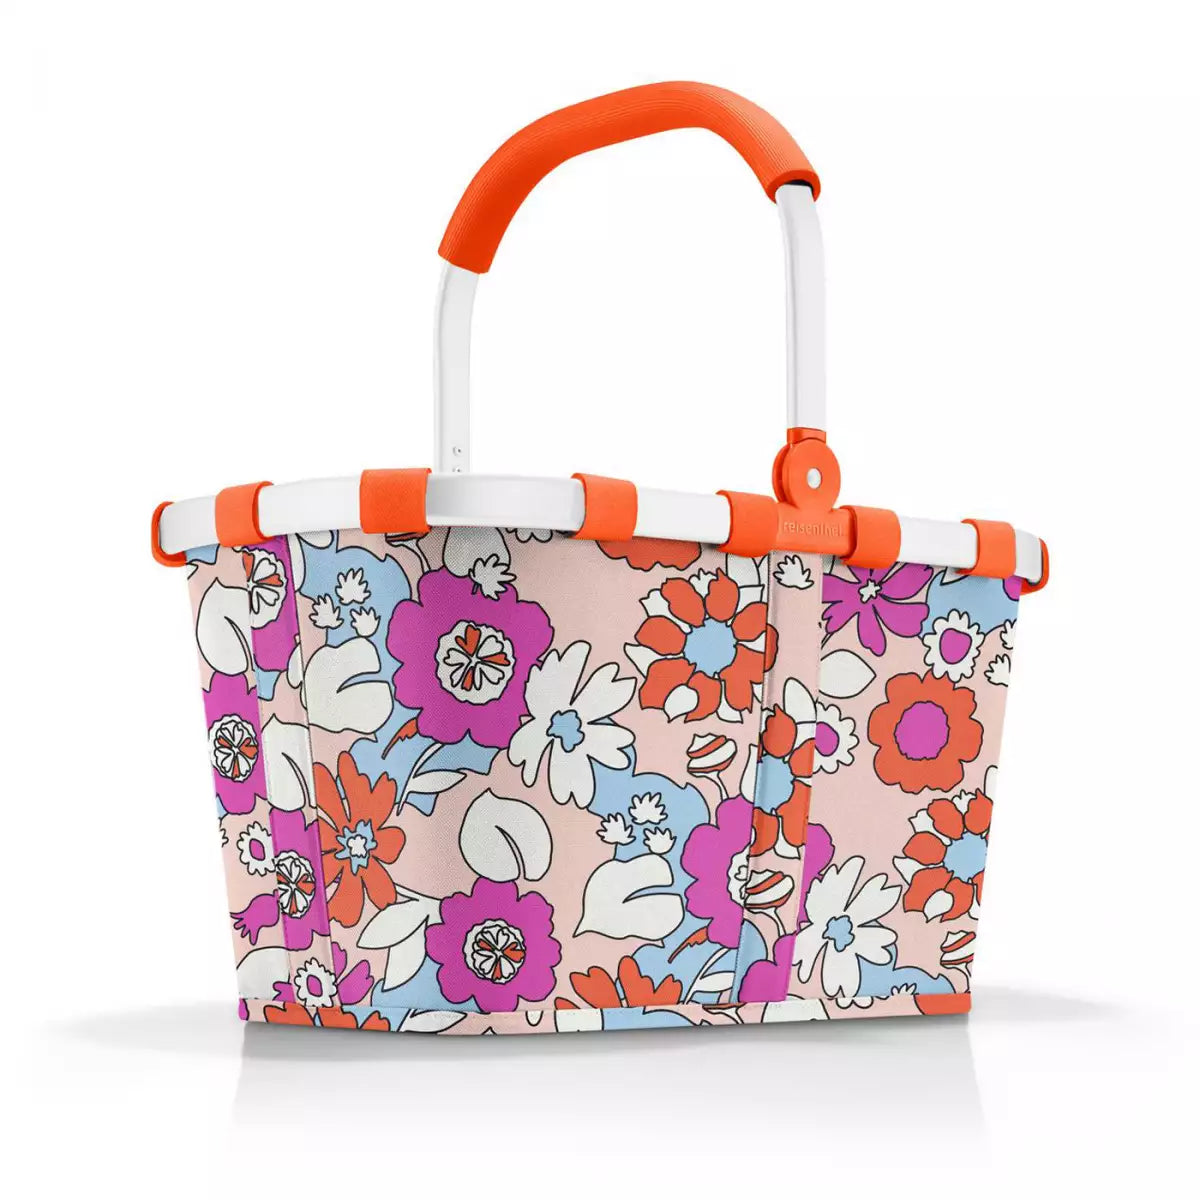 Carrybag Floral 1 from Reisenthel 48x29x28 cm. The original